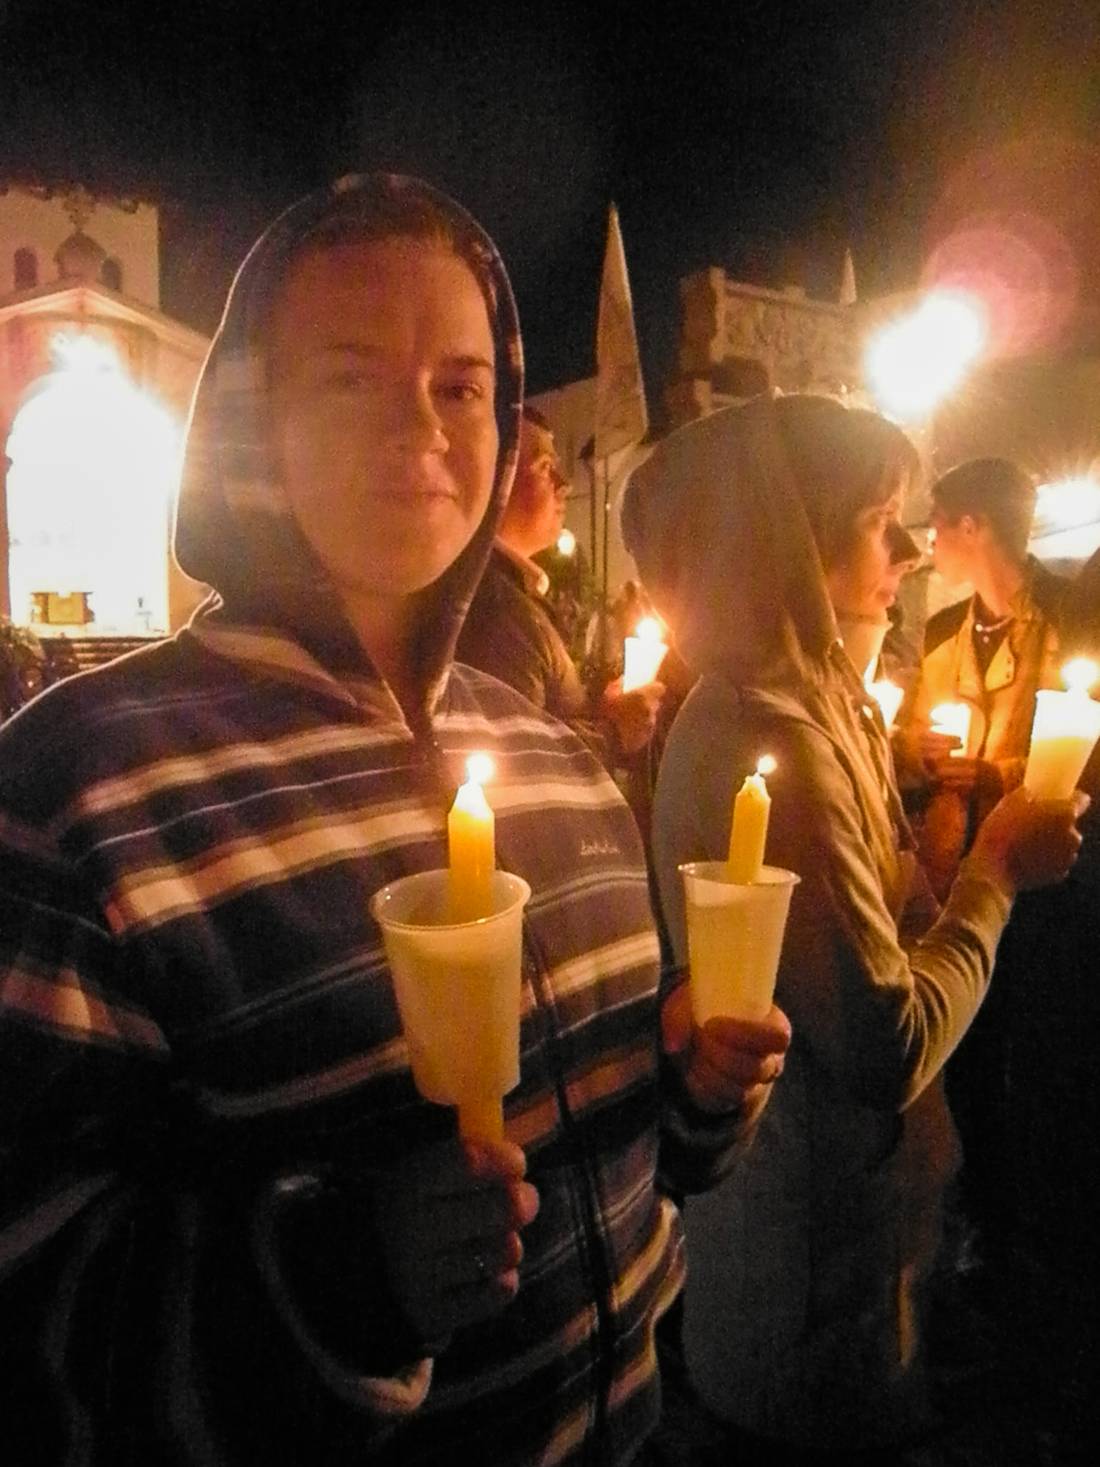 My wife and her friend are holding candles